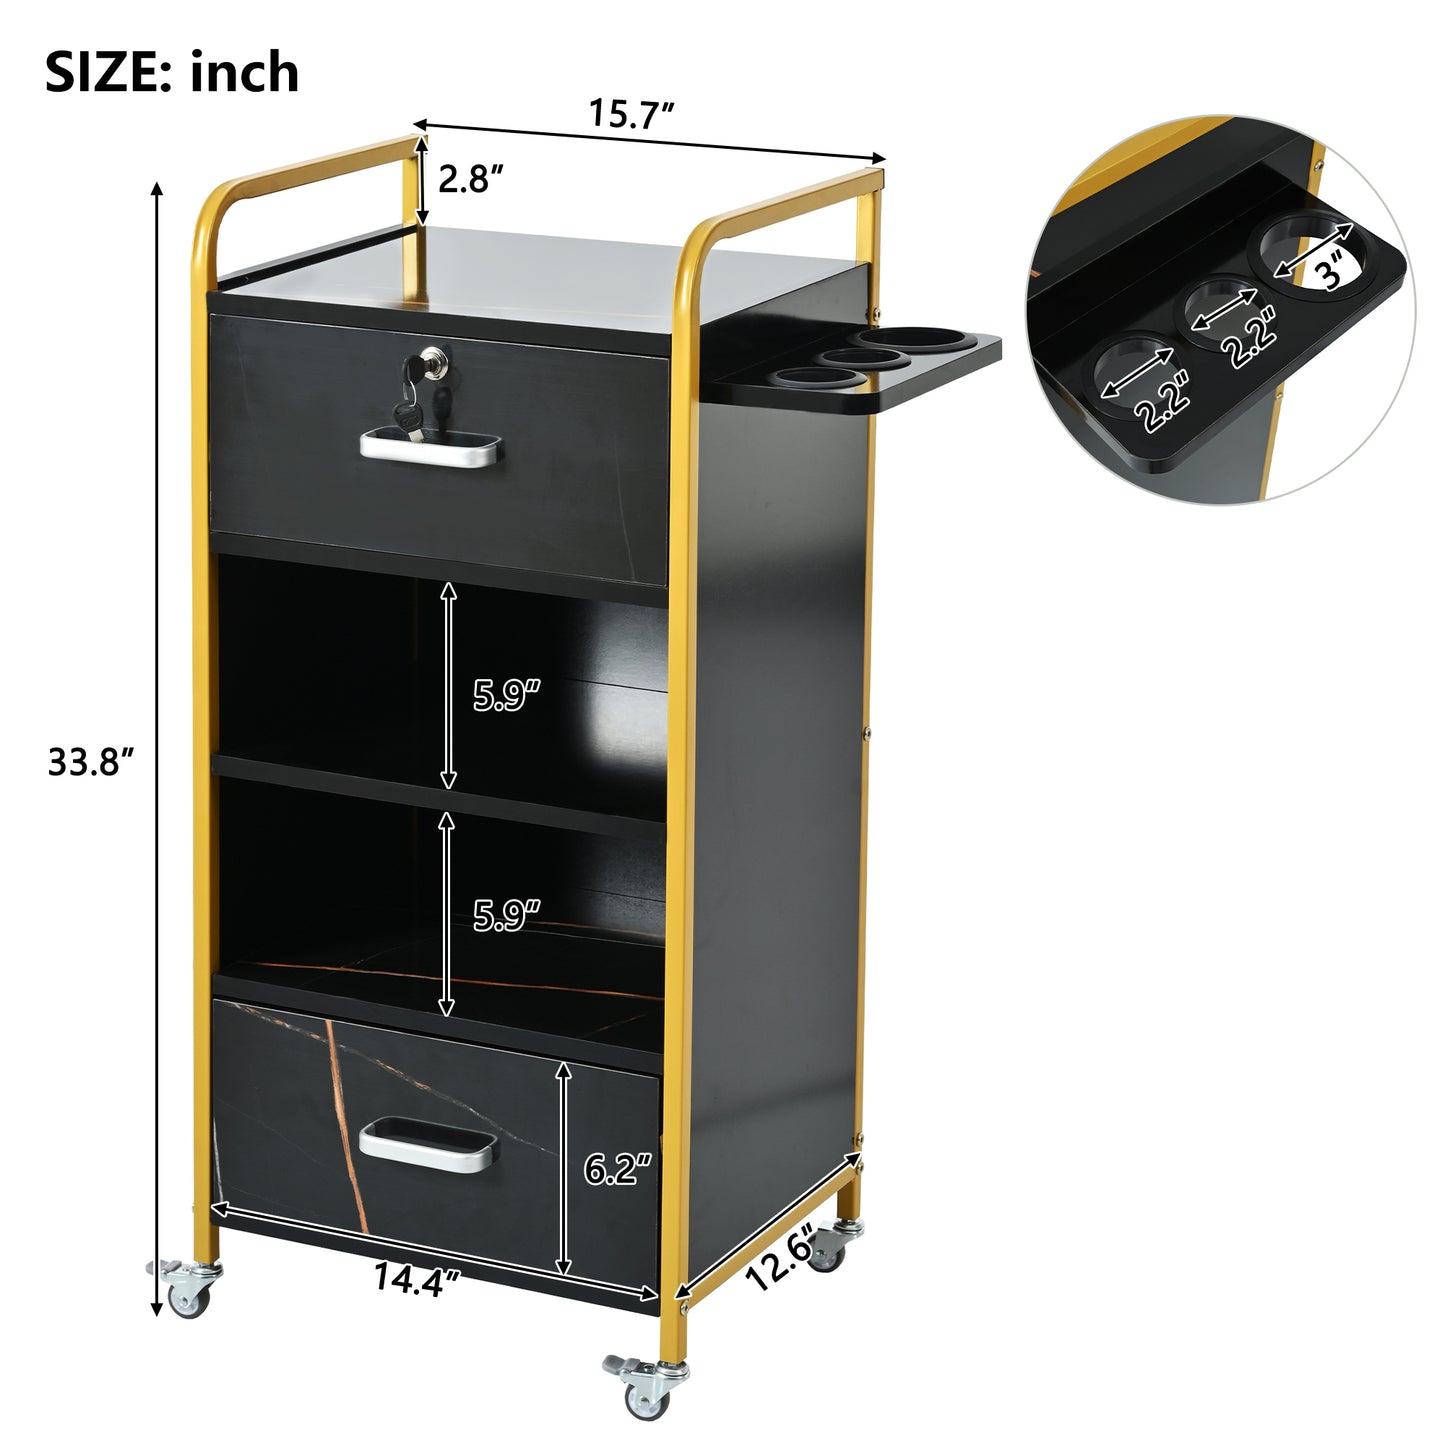 Locking Salon Storage Cabinet,Beauty Barber Salon Styling Station Organizer Equipment with 3 Hair Dryer Holder, 2 Drawers for Beauty Spa Barber Shop,Black